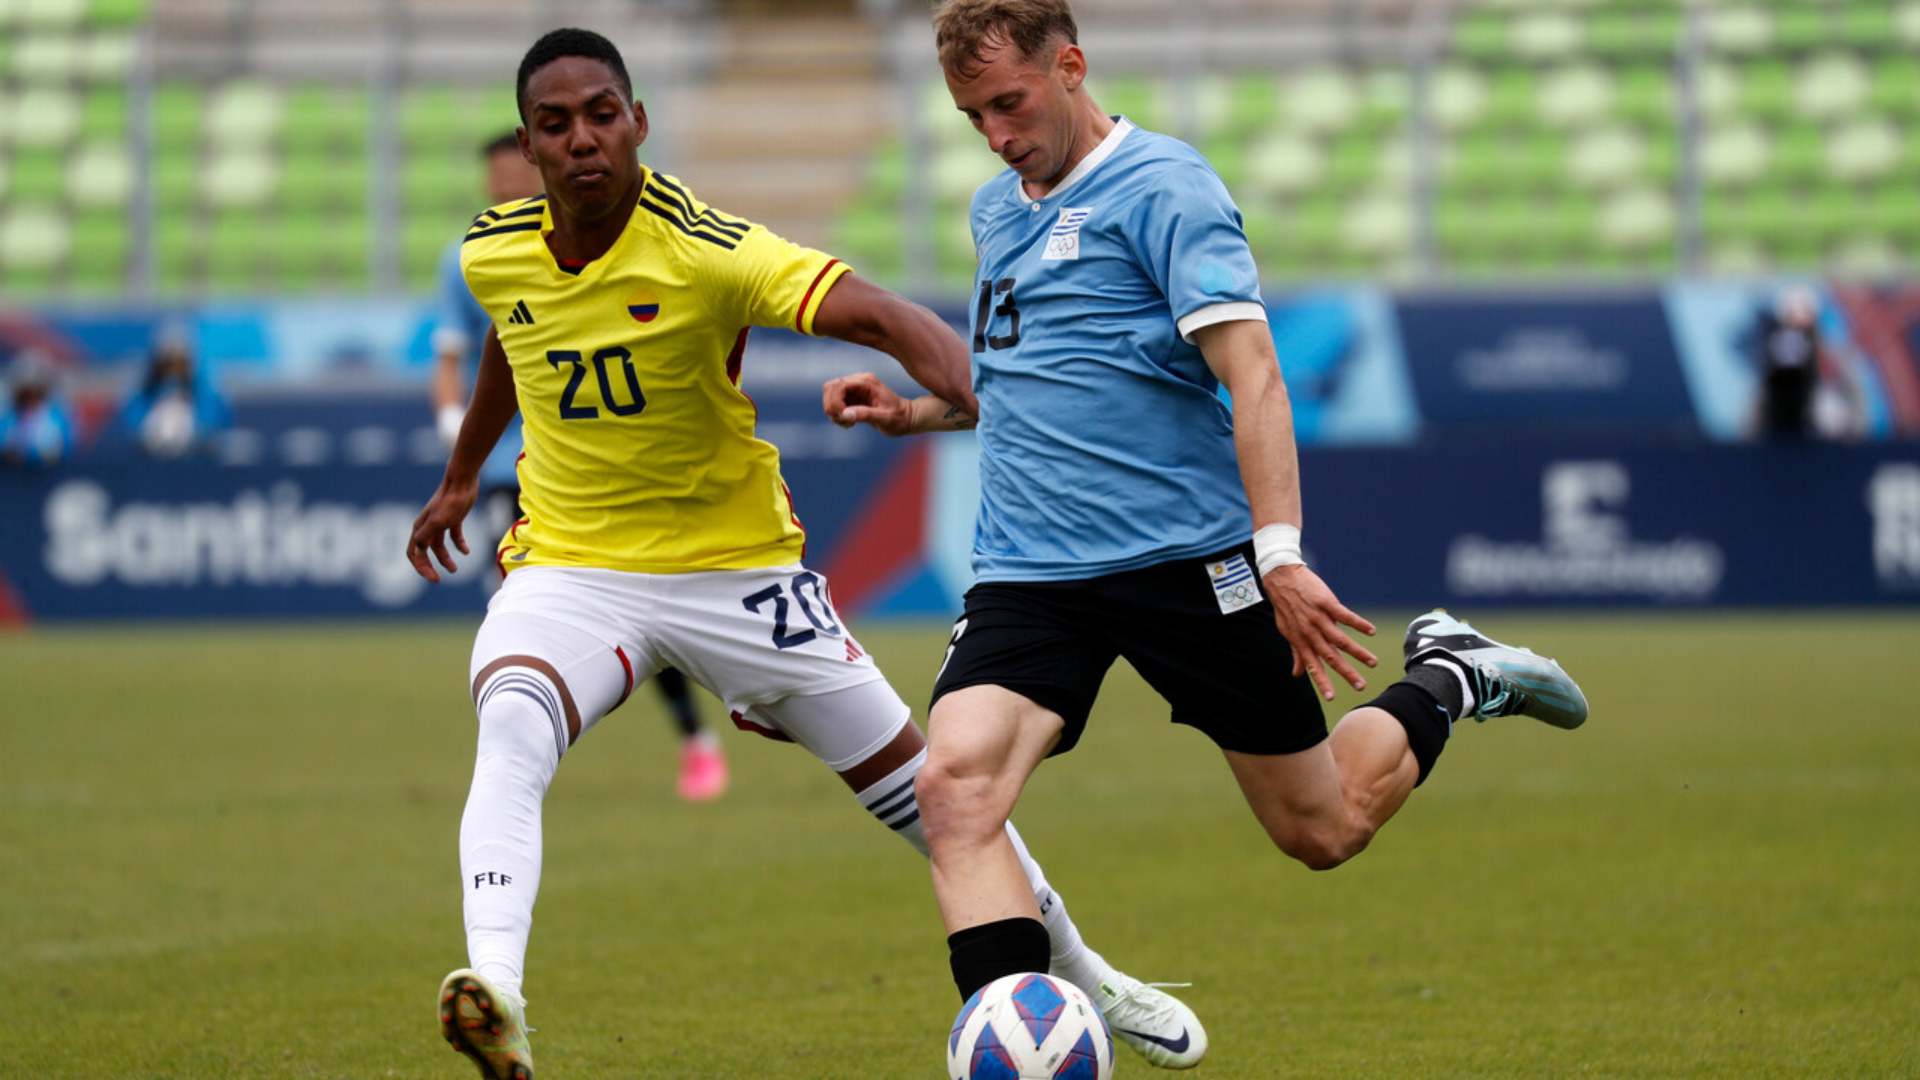 Male Football: Uruguay Achieves 5th Place by Beating Colombia